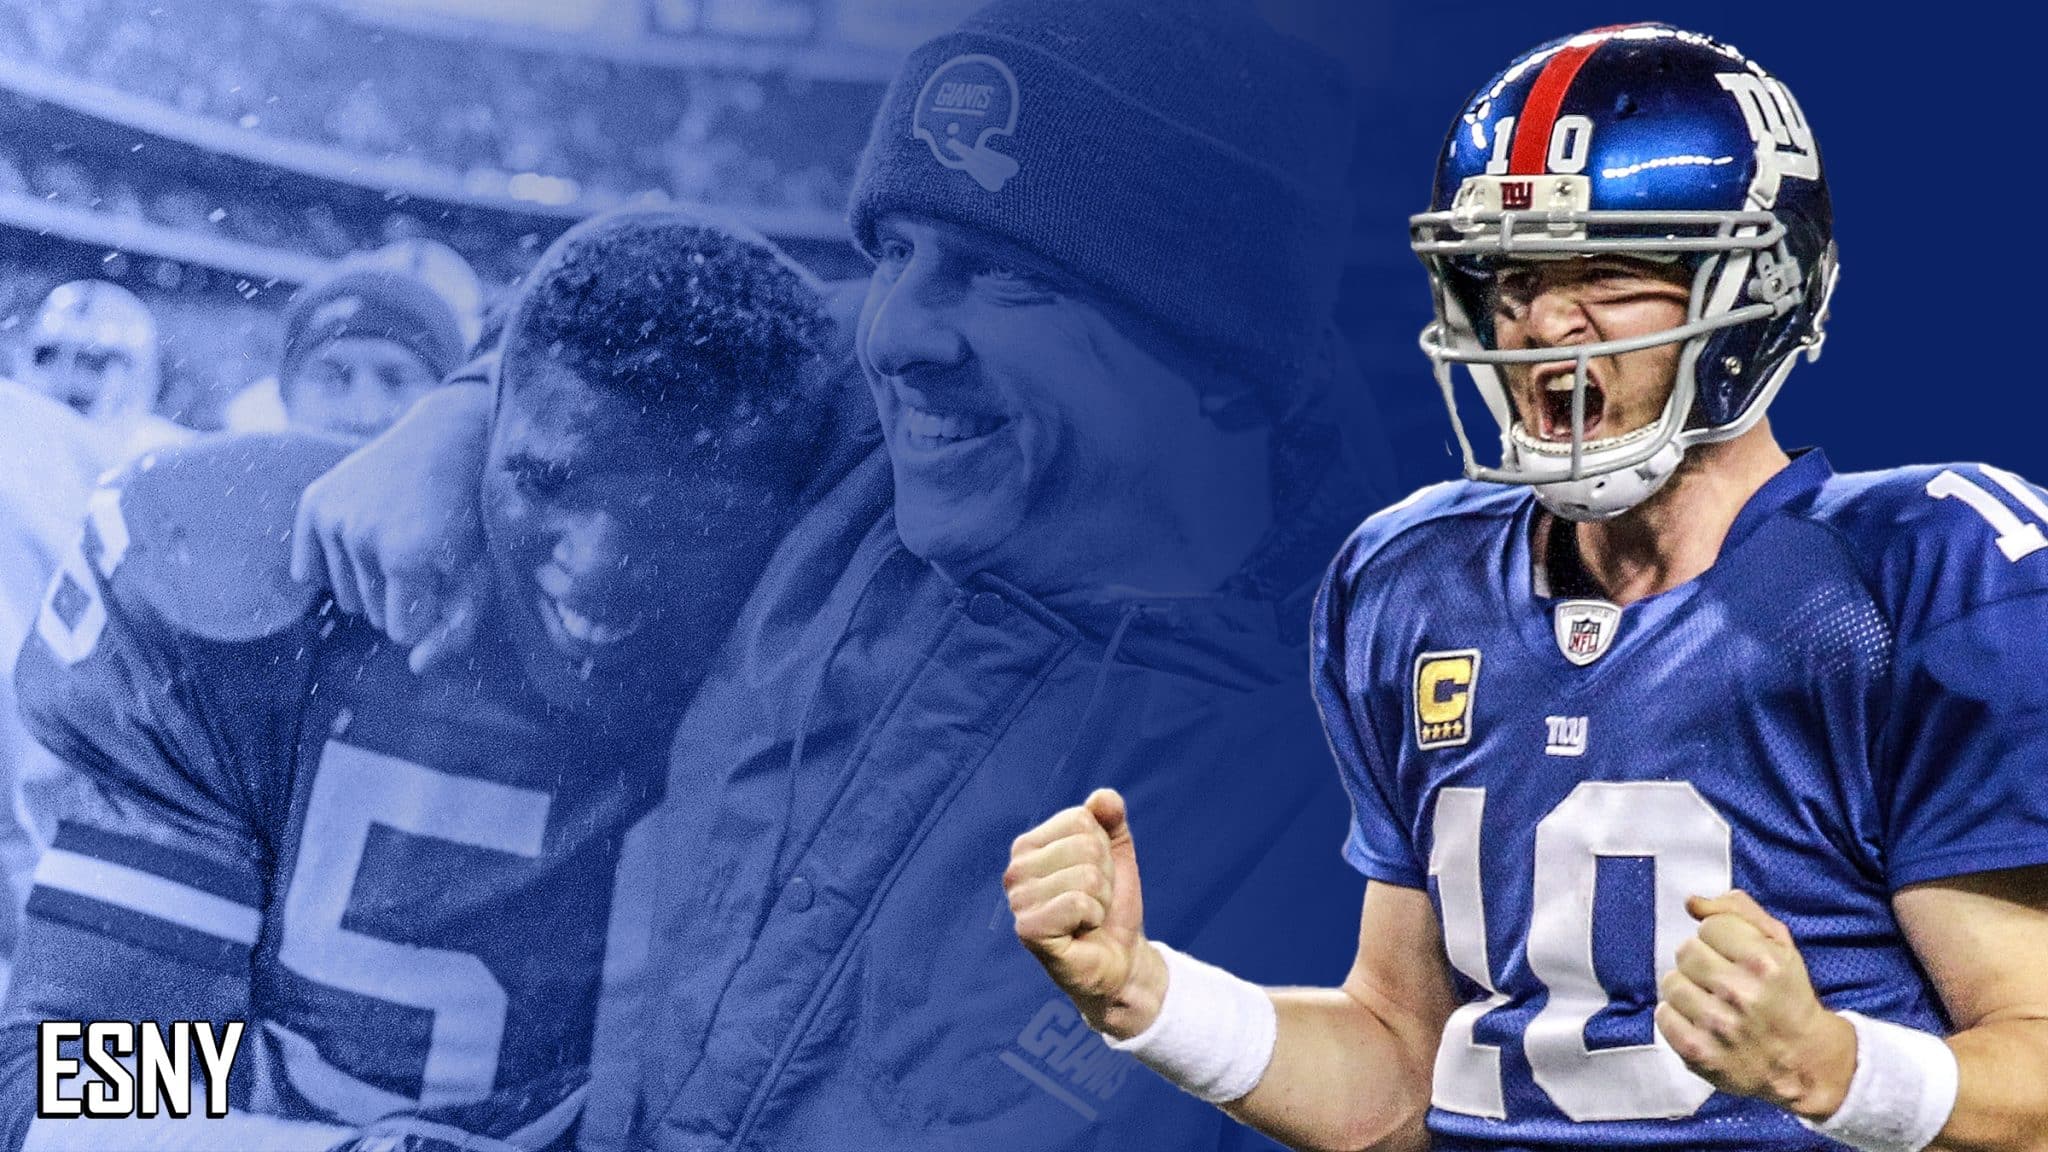 Ranking Eli Manning with the New York Giants' all-time greats